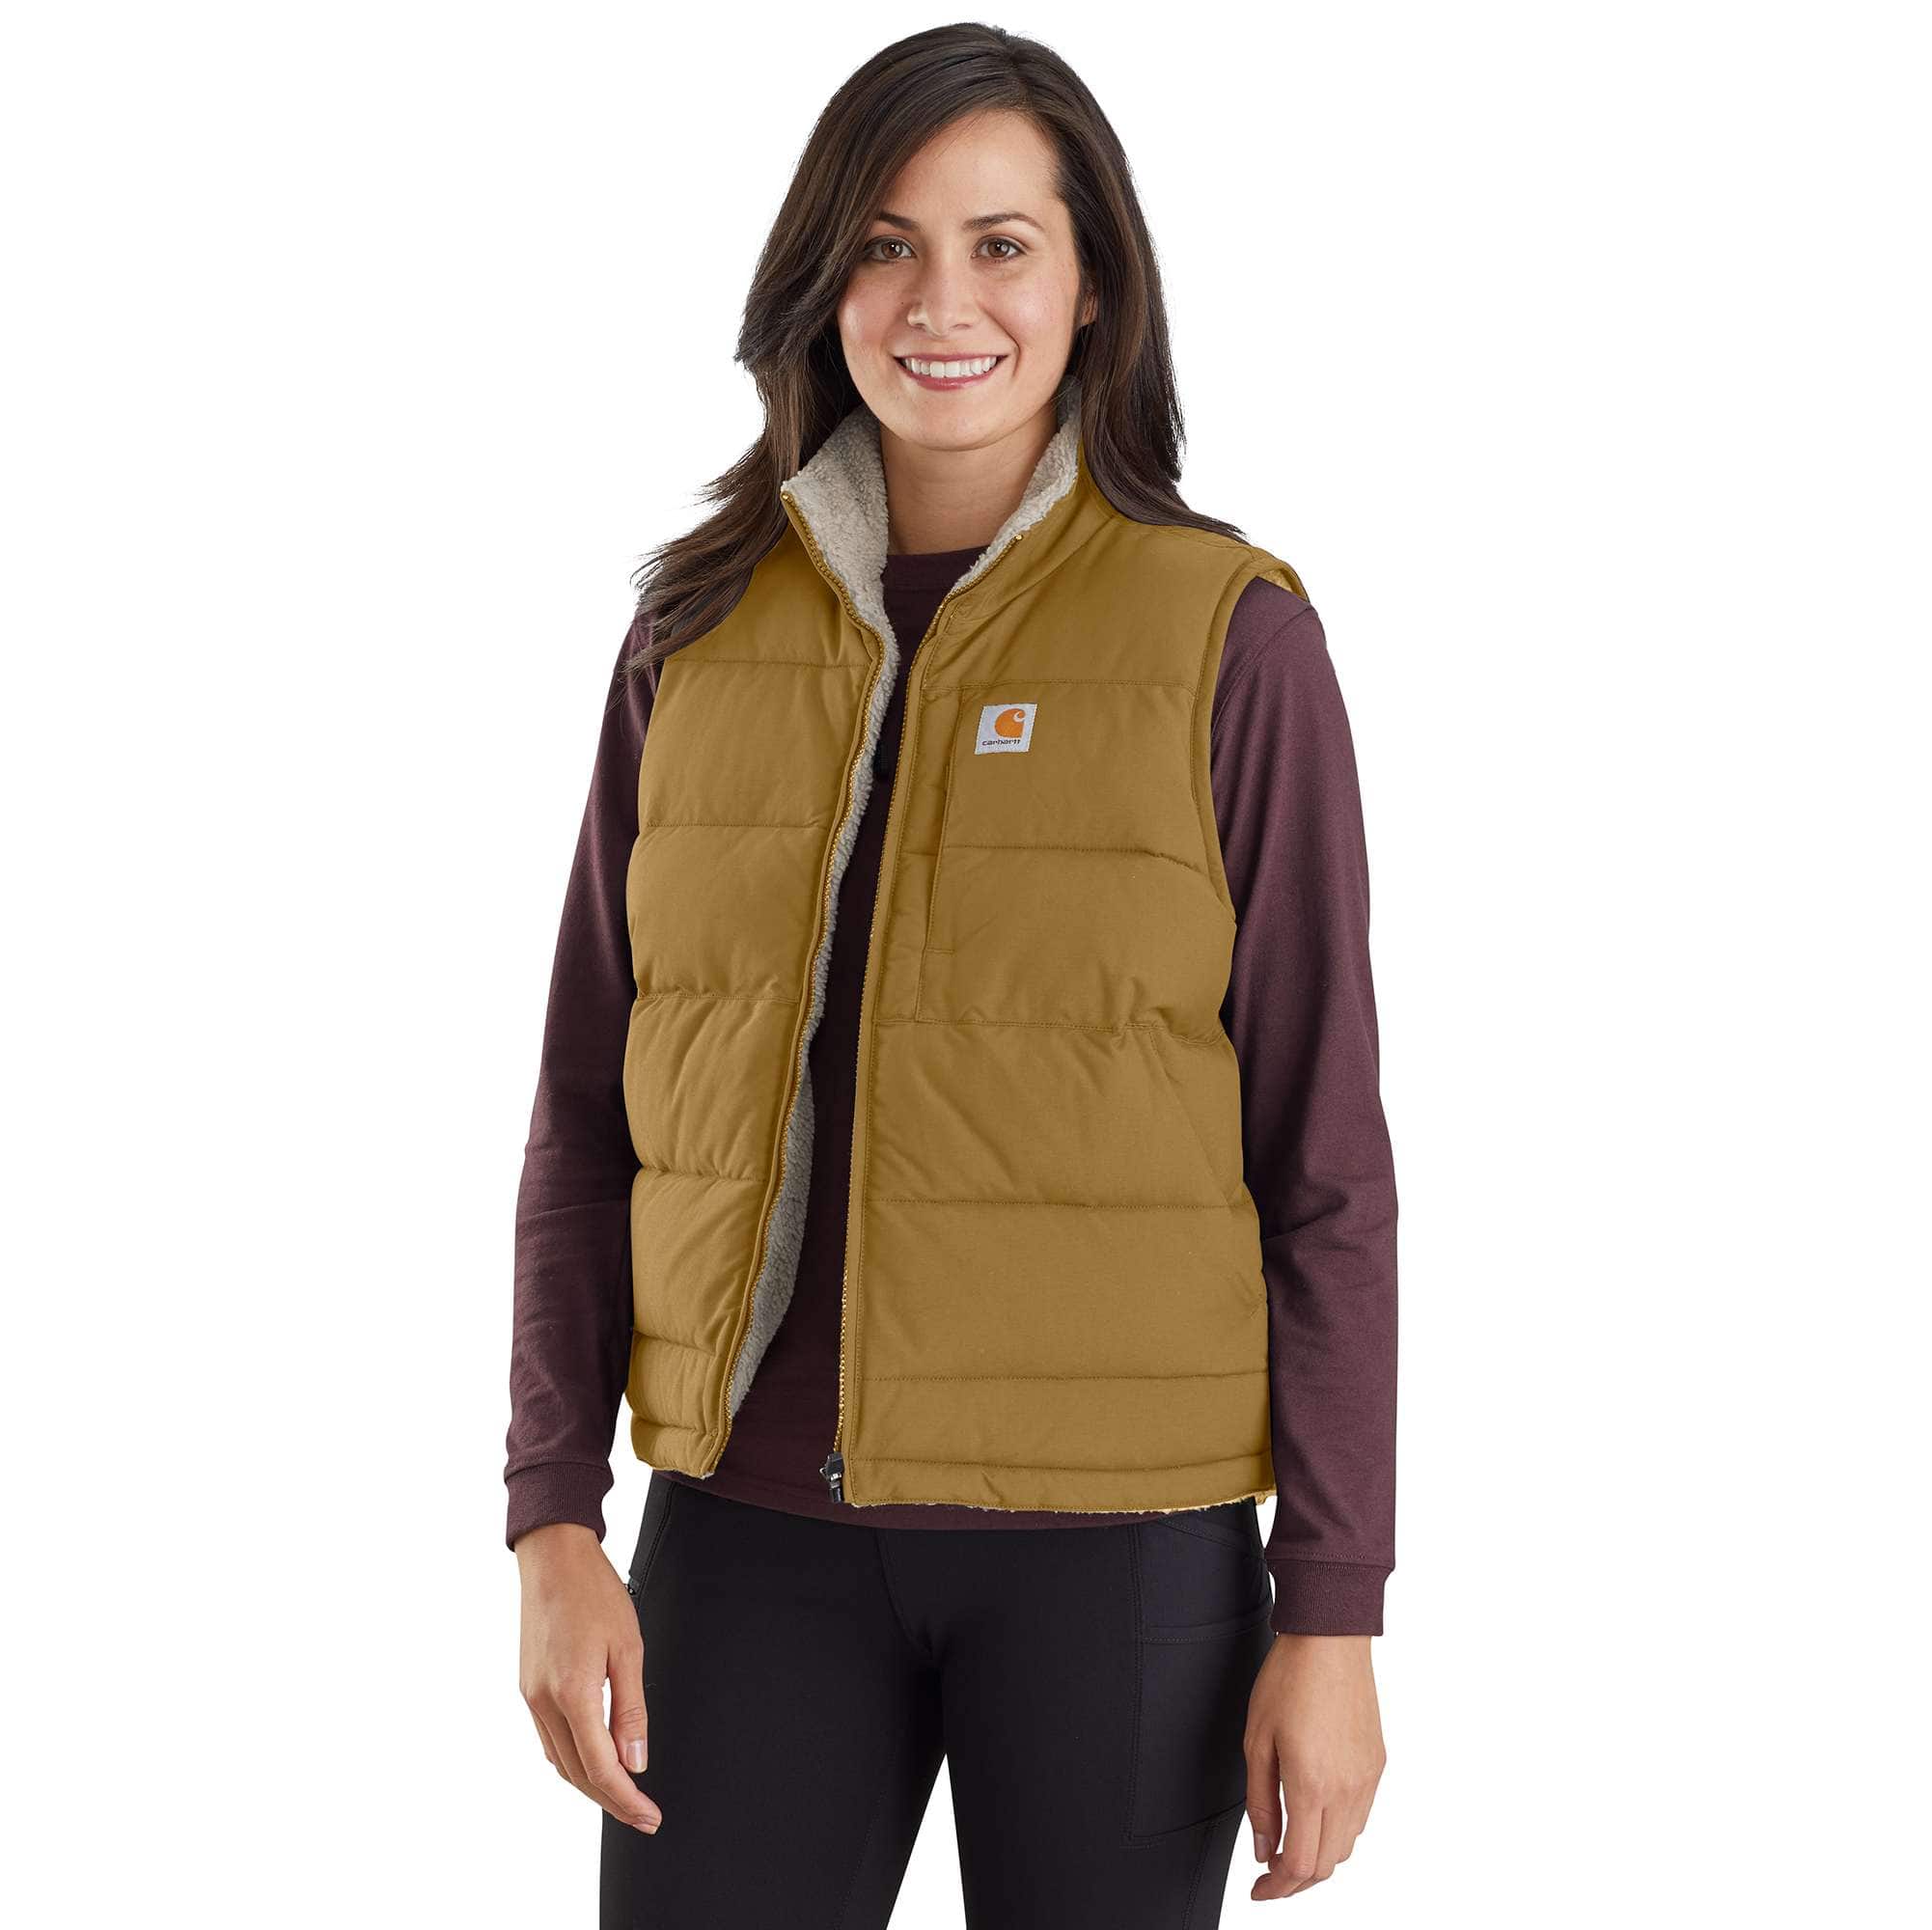 Cold Weather Gear & Winter Clothing, Carhartt